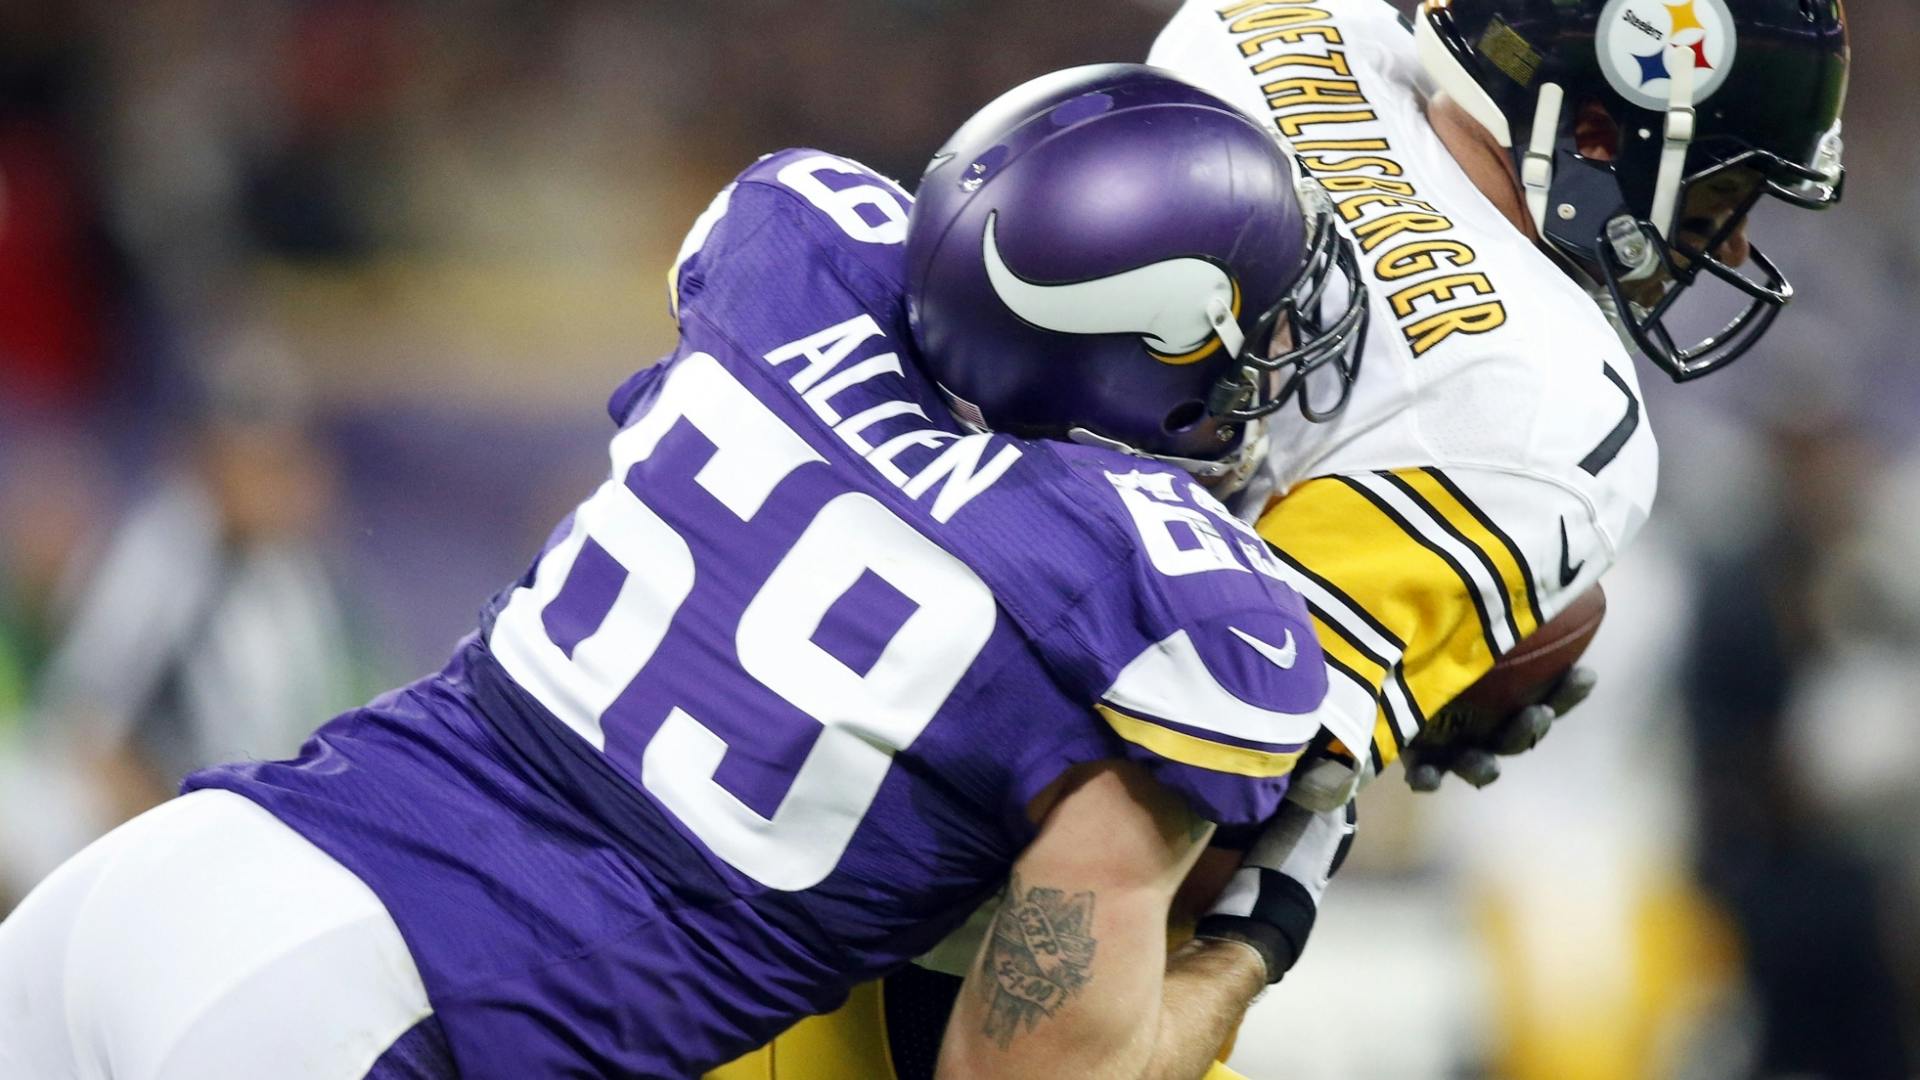 Vikings defensive end Brian Robison reflects on Jared Allen's impact on his career as he chases Derrick Thomas for third all-time in sacks.